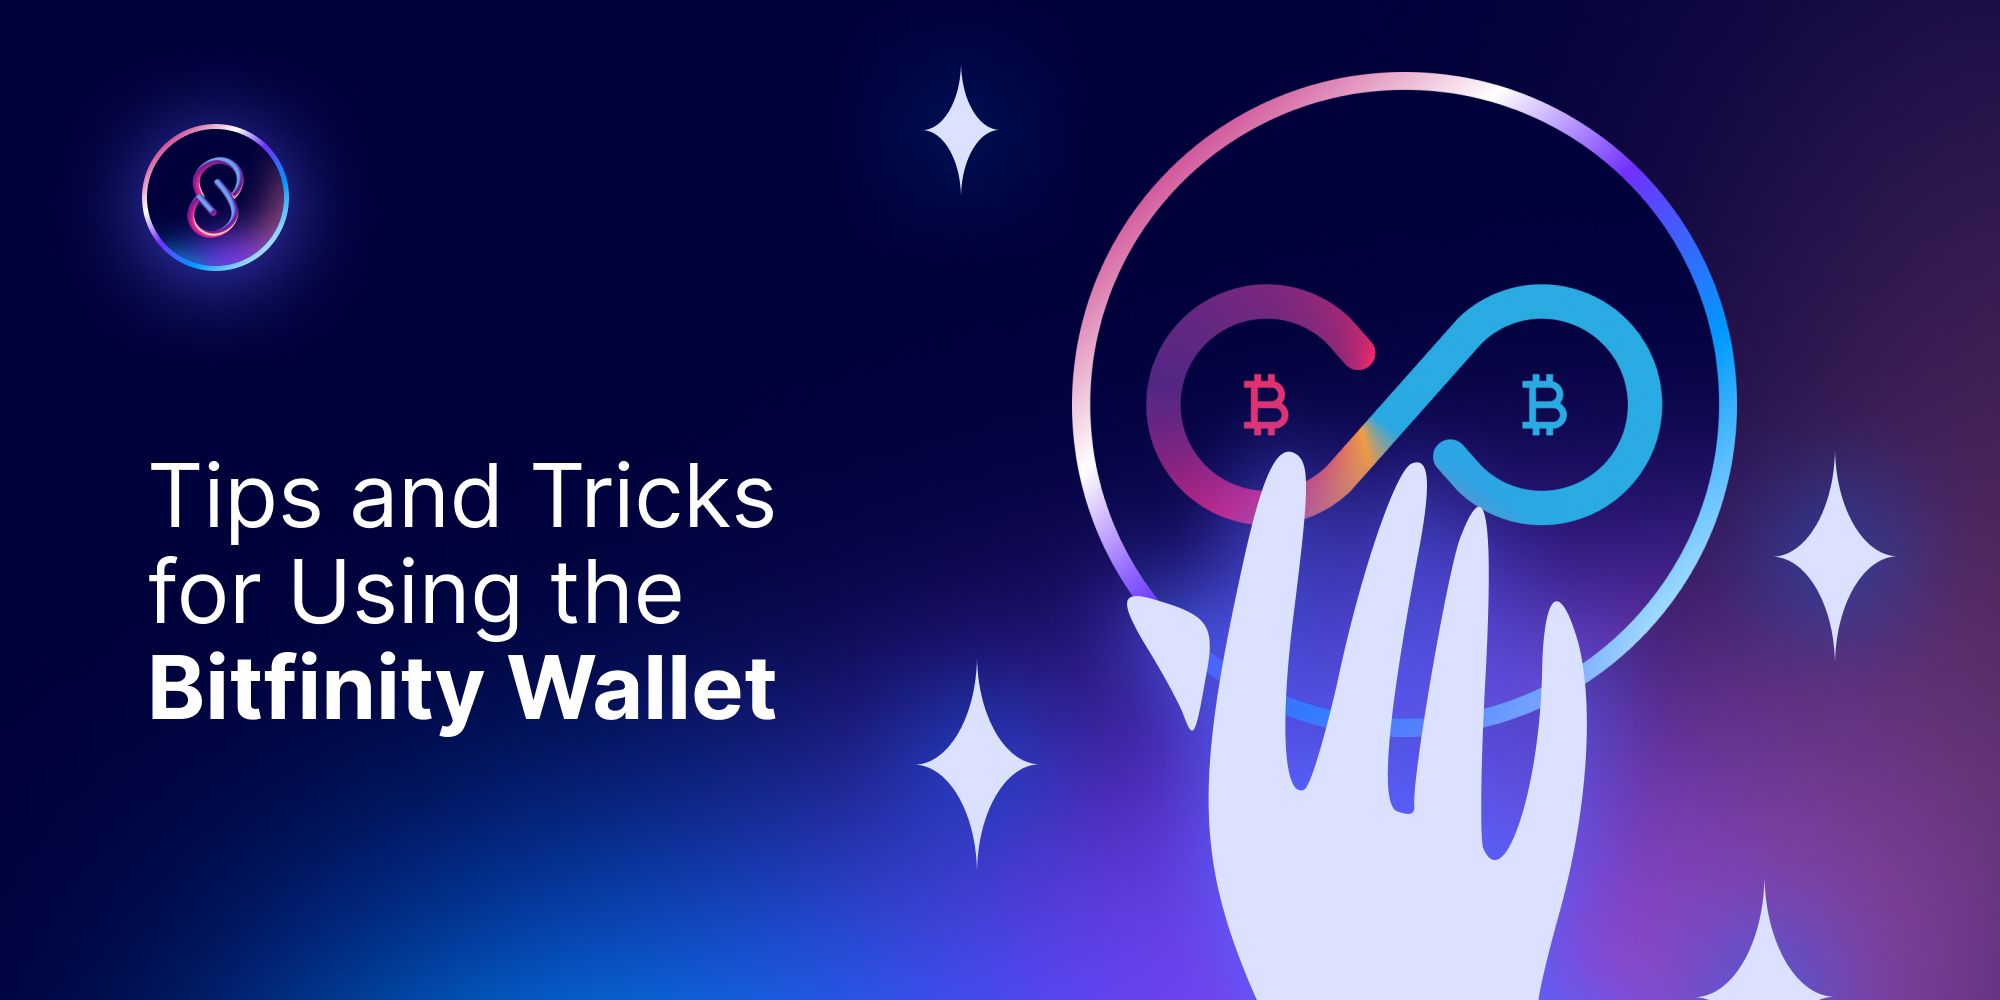 Tips and Tricks for Using the Bitfinity Wallet